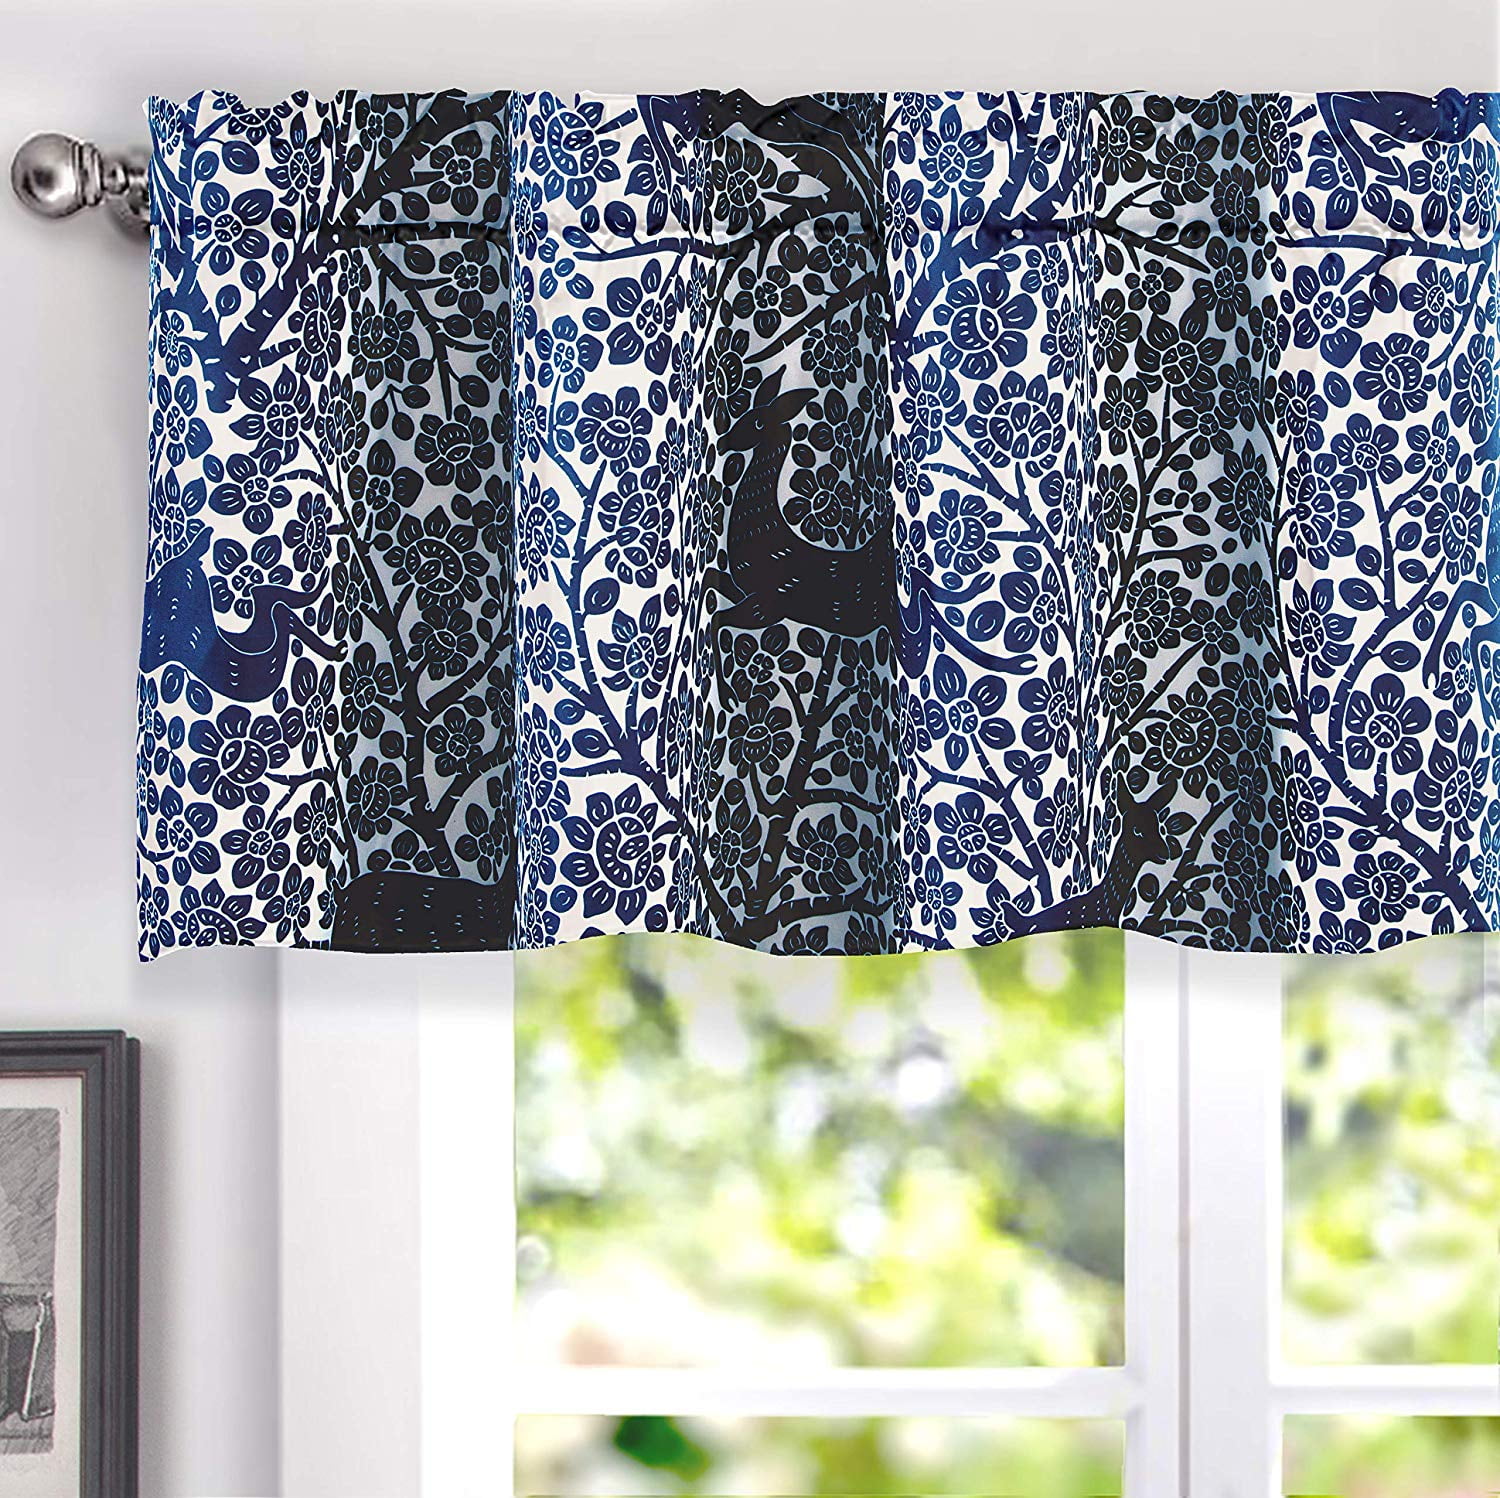 DriftAway Gianna Floral Leaf Botanical Lined Thermal Insulated Energy Saving Window Curtain Valance for Living Room Bedroom Kitchen Rod Pocket 2 Pack 52 Inch by 18 Inch Plus 2 Inch Header Navy 